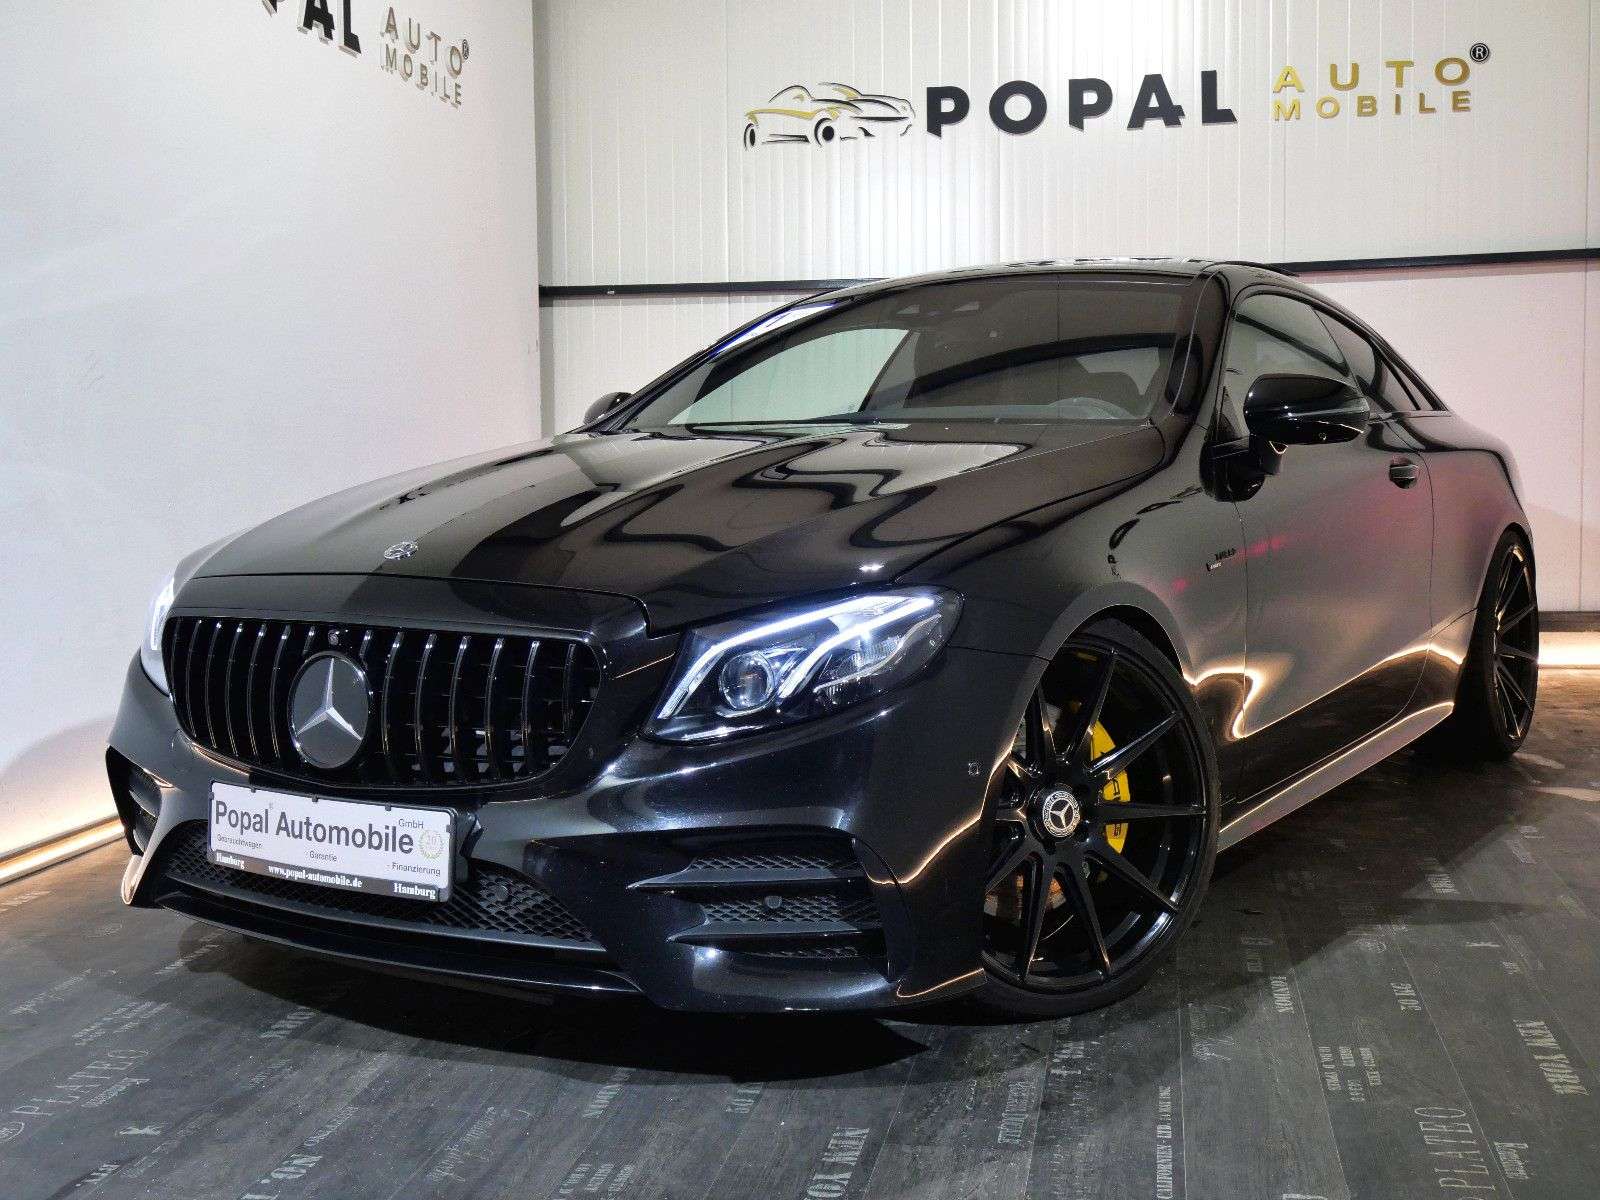 Mercedes-Benz E 53 AMG Coupe in Black used in Hamburg for € 55,950.-